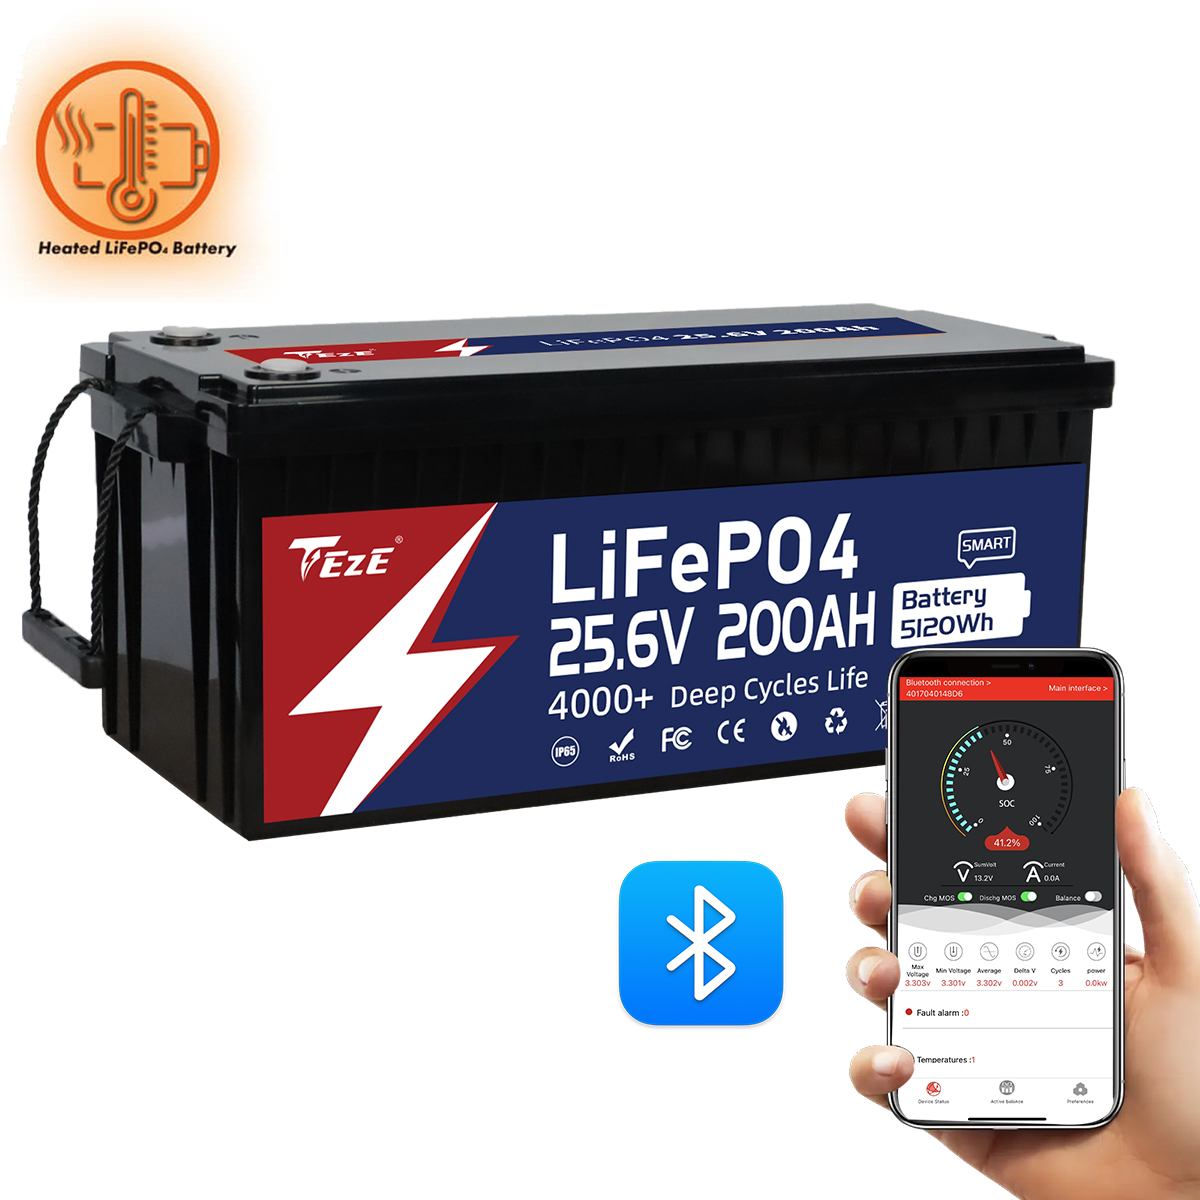 TezePower 24V 200Ah LiFePO4 Battery with Bluetooth, Self-heating and Active Balancer, Built-in 200A Daly BMS (Bluetooth Built-in Version)-TezePower